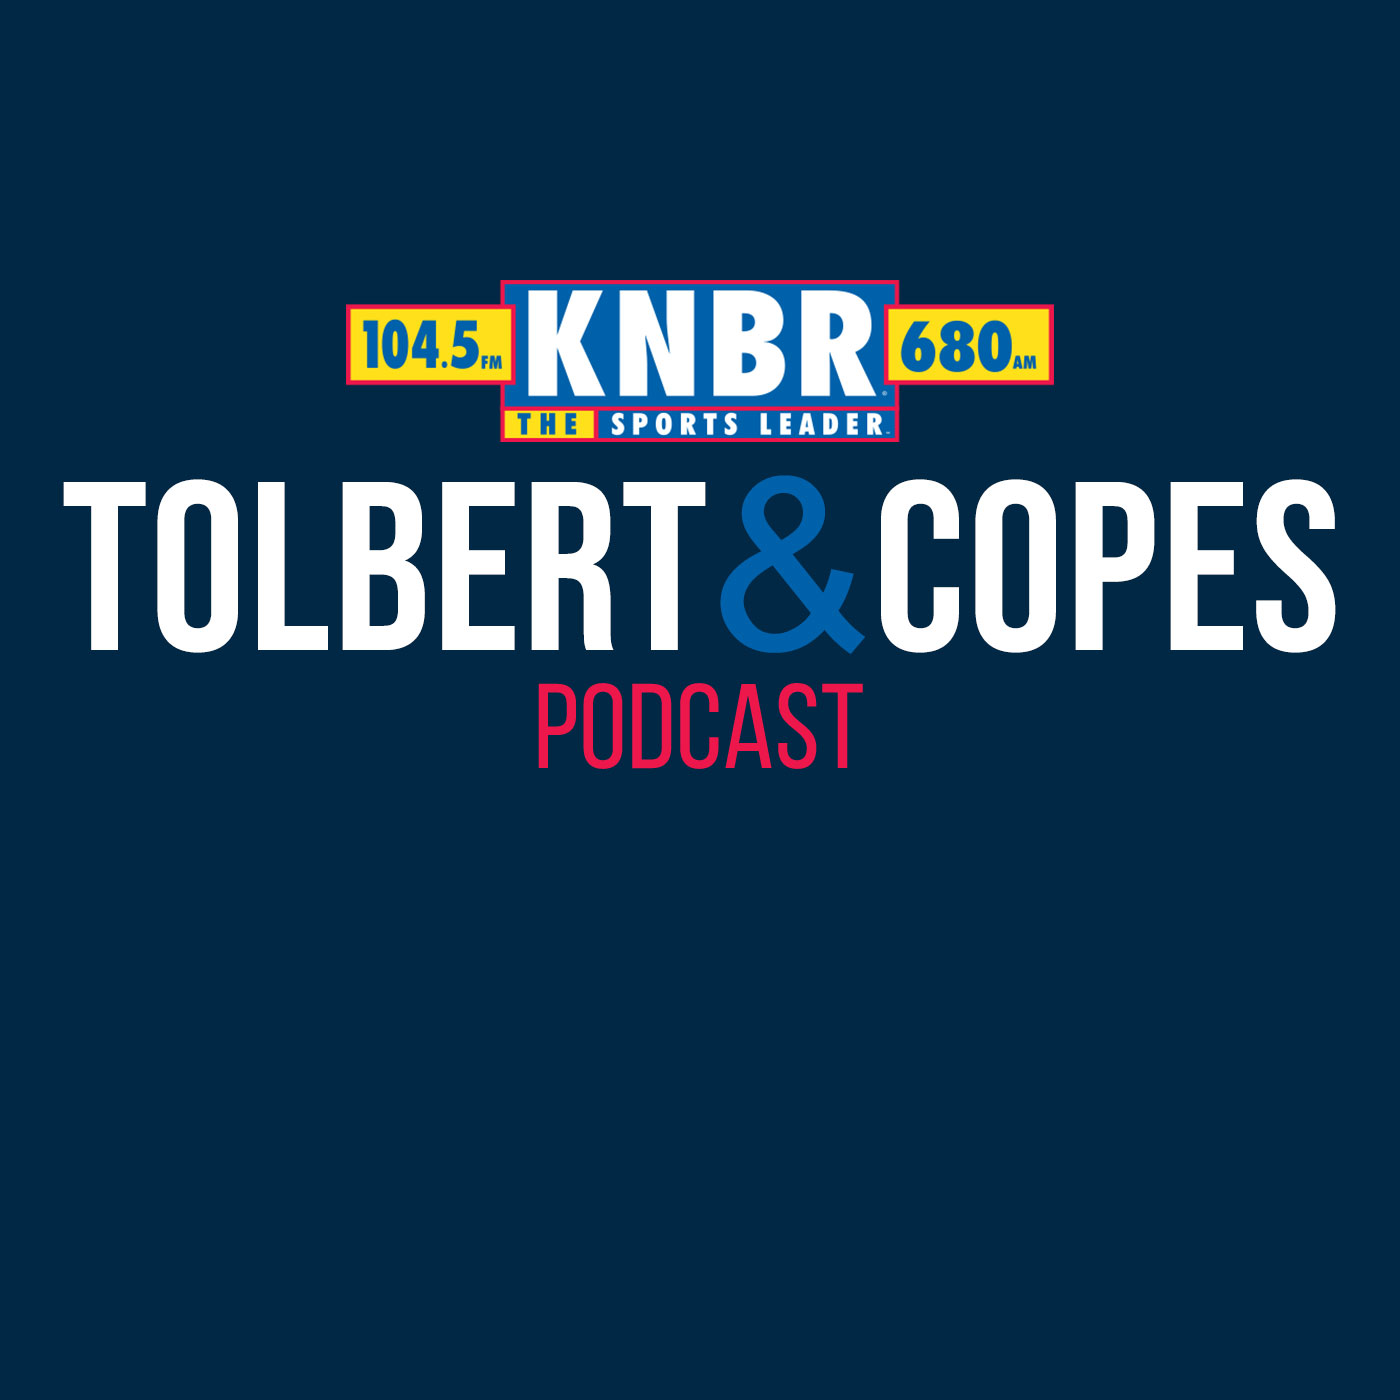 3-22 Jay Bilas joins Tolbert & Copes to discuss the matchups in the Sweet 16